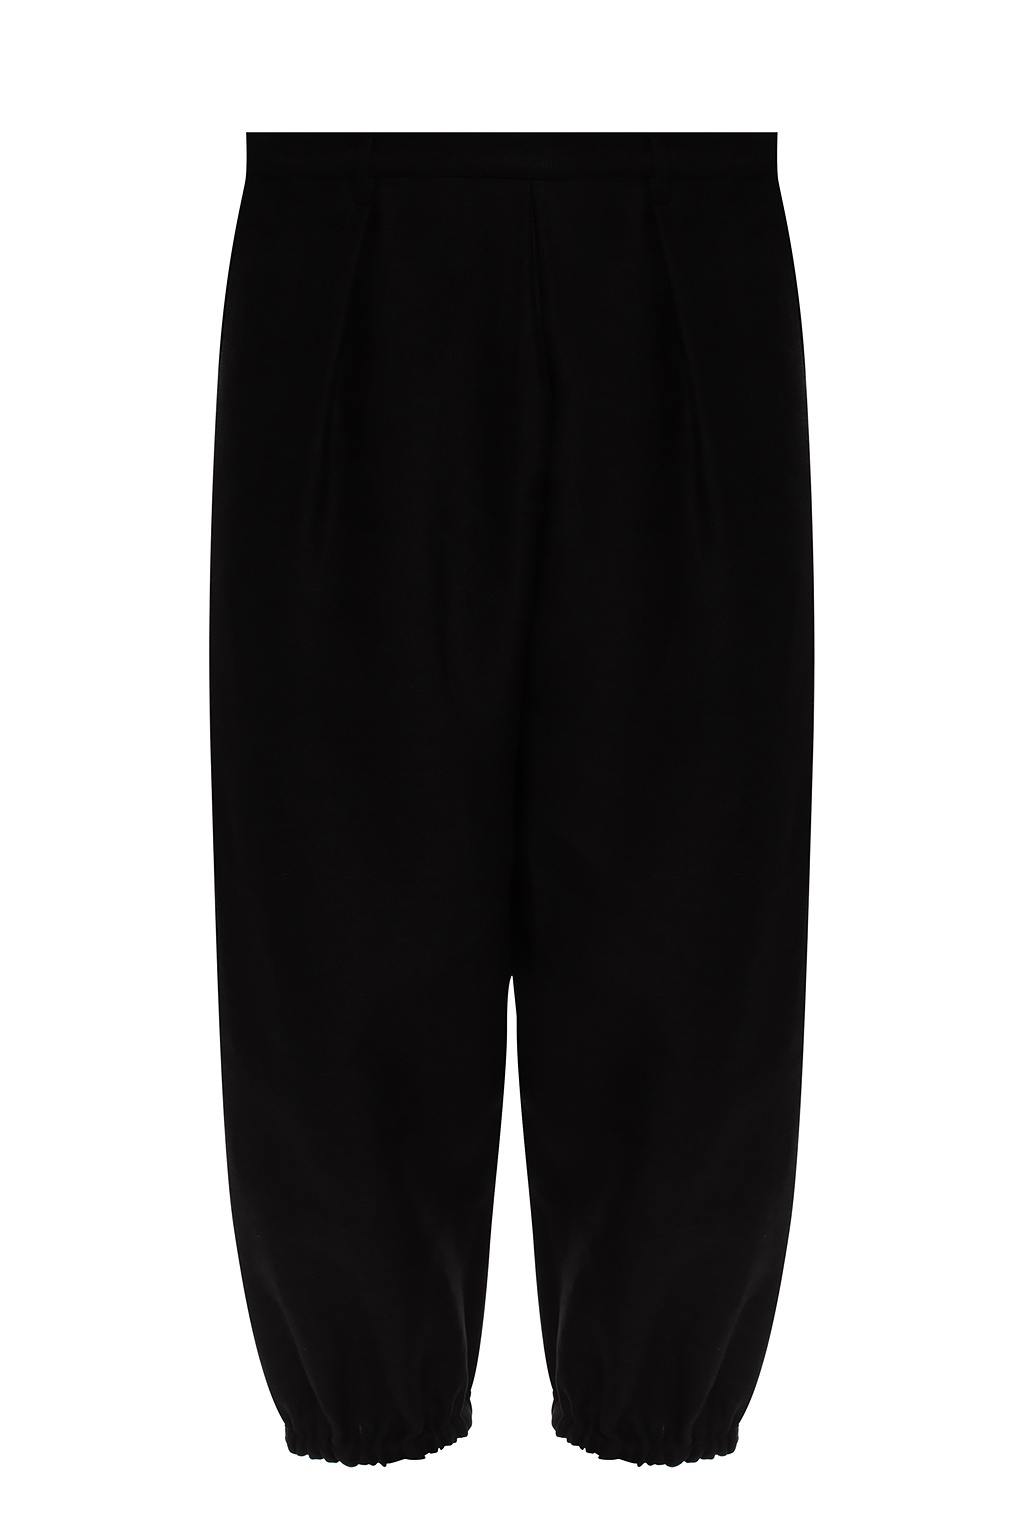 Saint Laurent skinny trousers with elasticated cuffs